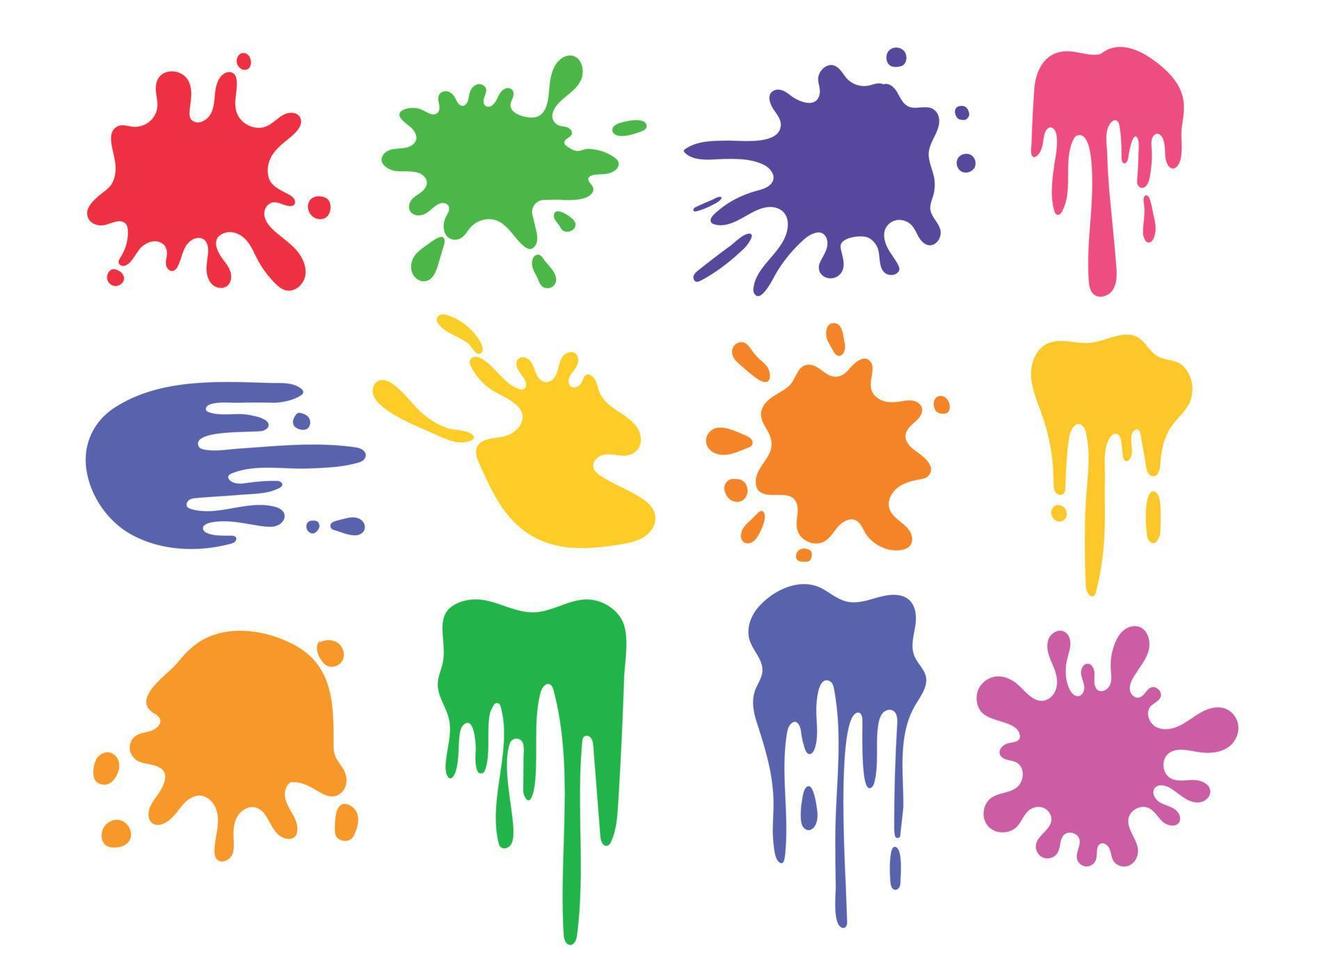 Flat collection of vector illustrations of colorful ink blots.Various splashes and drops, cartoon splashes. Collection of ink stained paints.